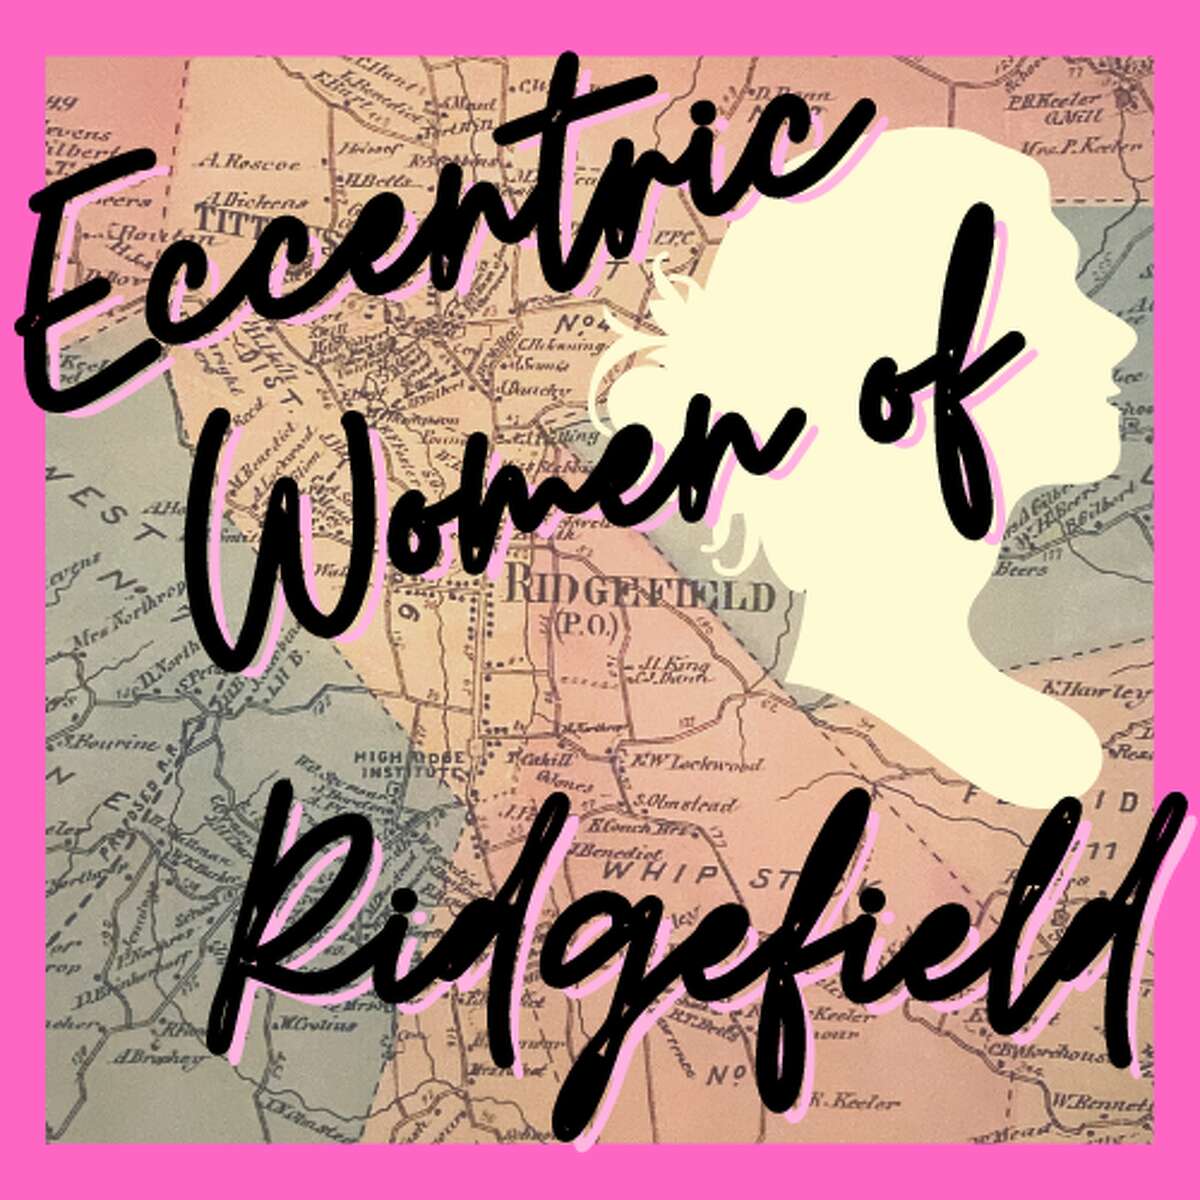  The Ridgefield Theater Barn is partnering with the Ridgefield Historical Society to present: "Eccentric Women of Ridgefield," Nov. 18 and Nov. 20 at the theater barn, which is located at 37 Halpin Lane in Ridgefield. 